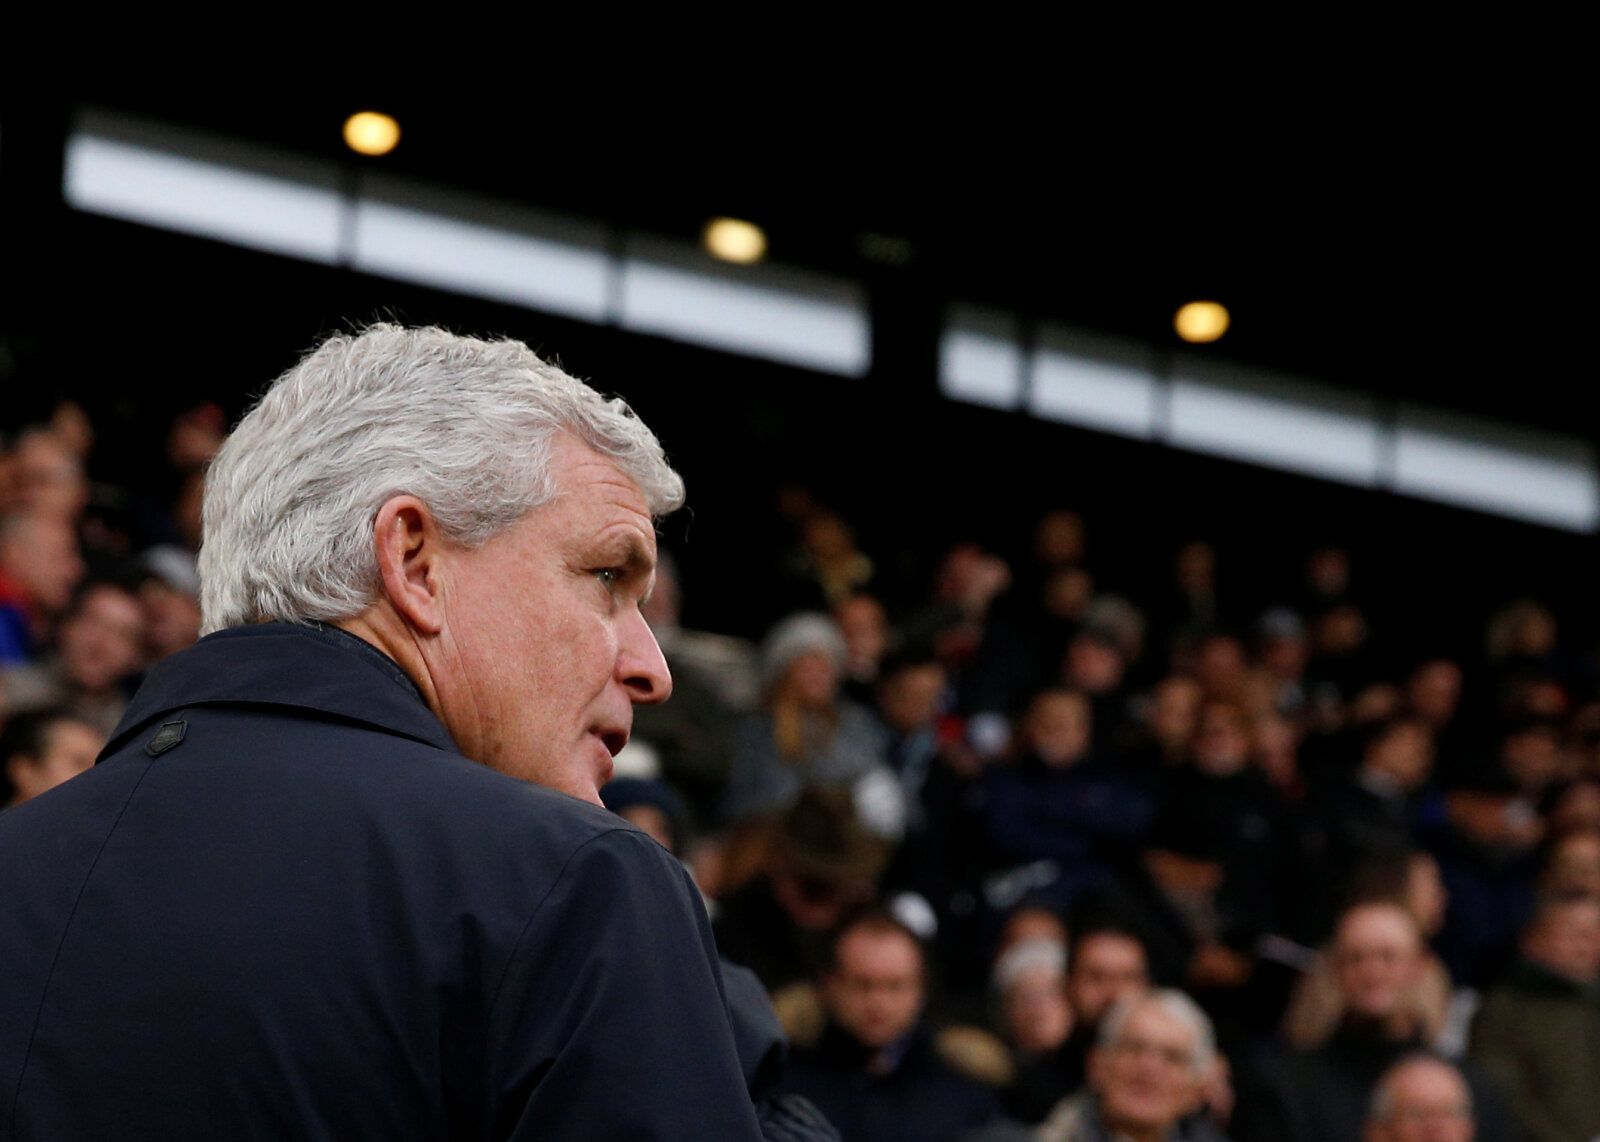 Soccer Football - Premier League - Fulham v Southampton - Craven Cottage, London, Britain - November 24, 2018  Southampton manager Mark Hughes before the match   Action Images via Reuters/Andrew Couldridge  EDITORIAL USE ONLY. No use with unauthorized audio, video, data, fixture lists, club/league logos or 